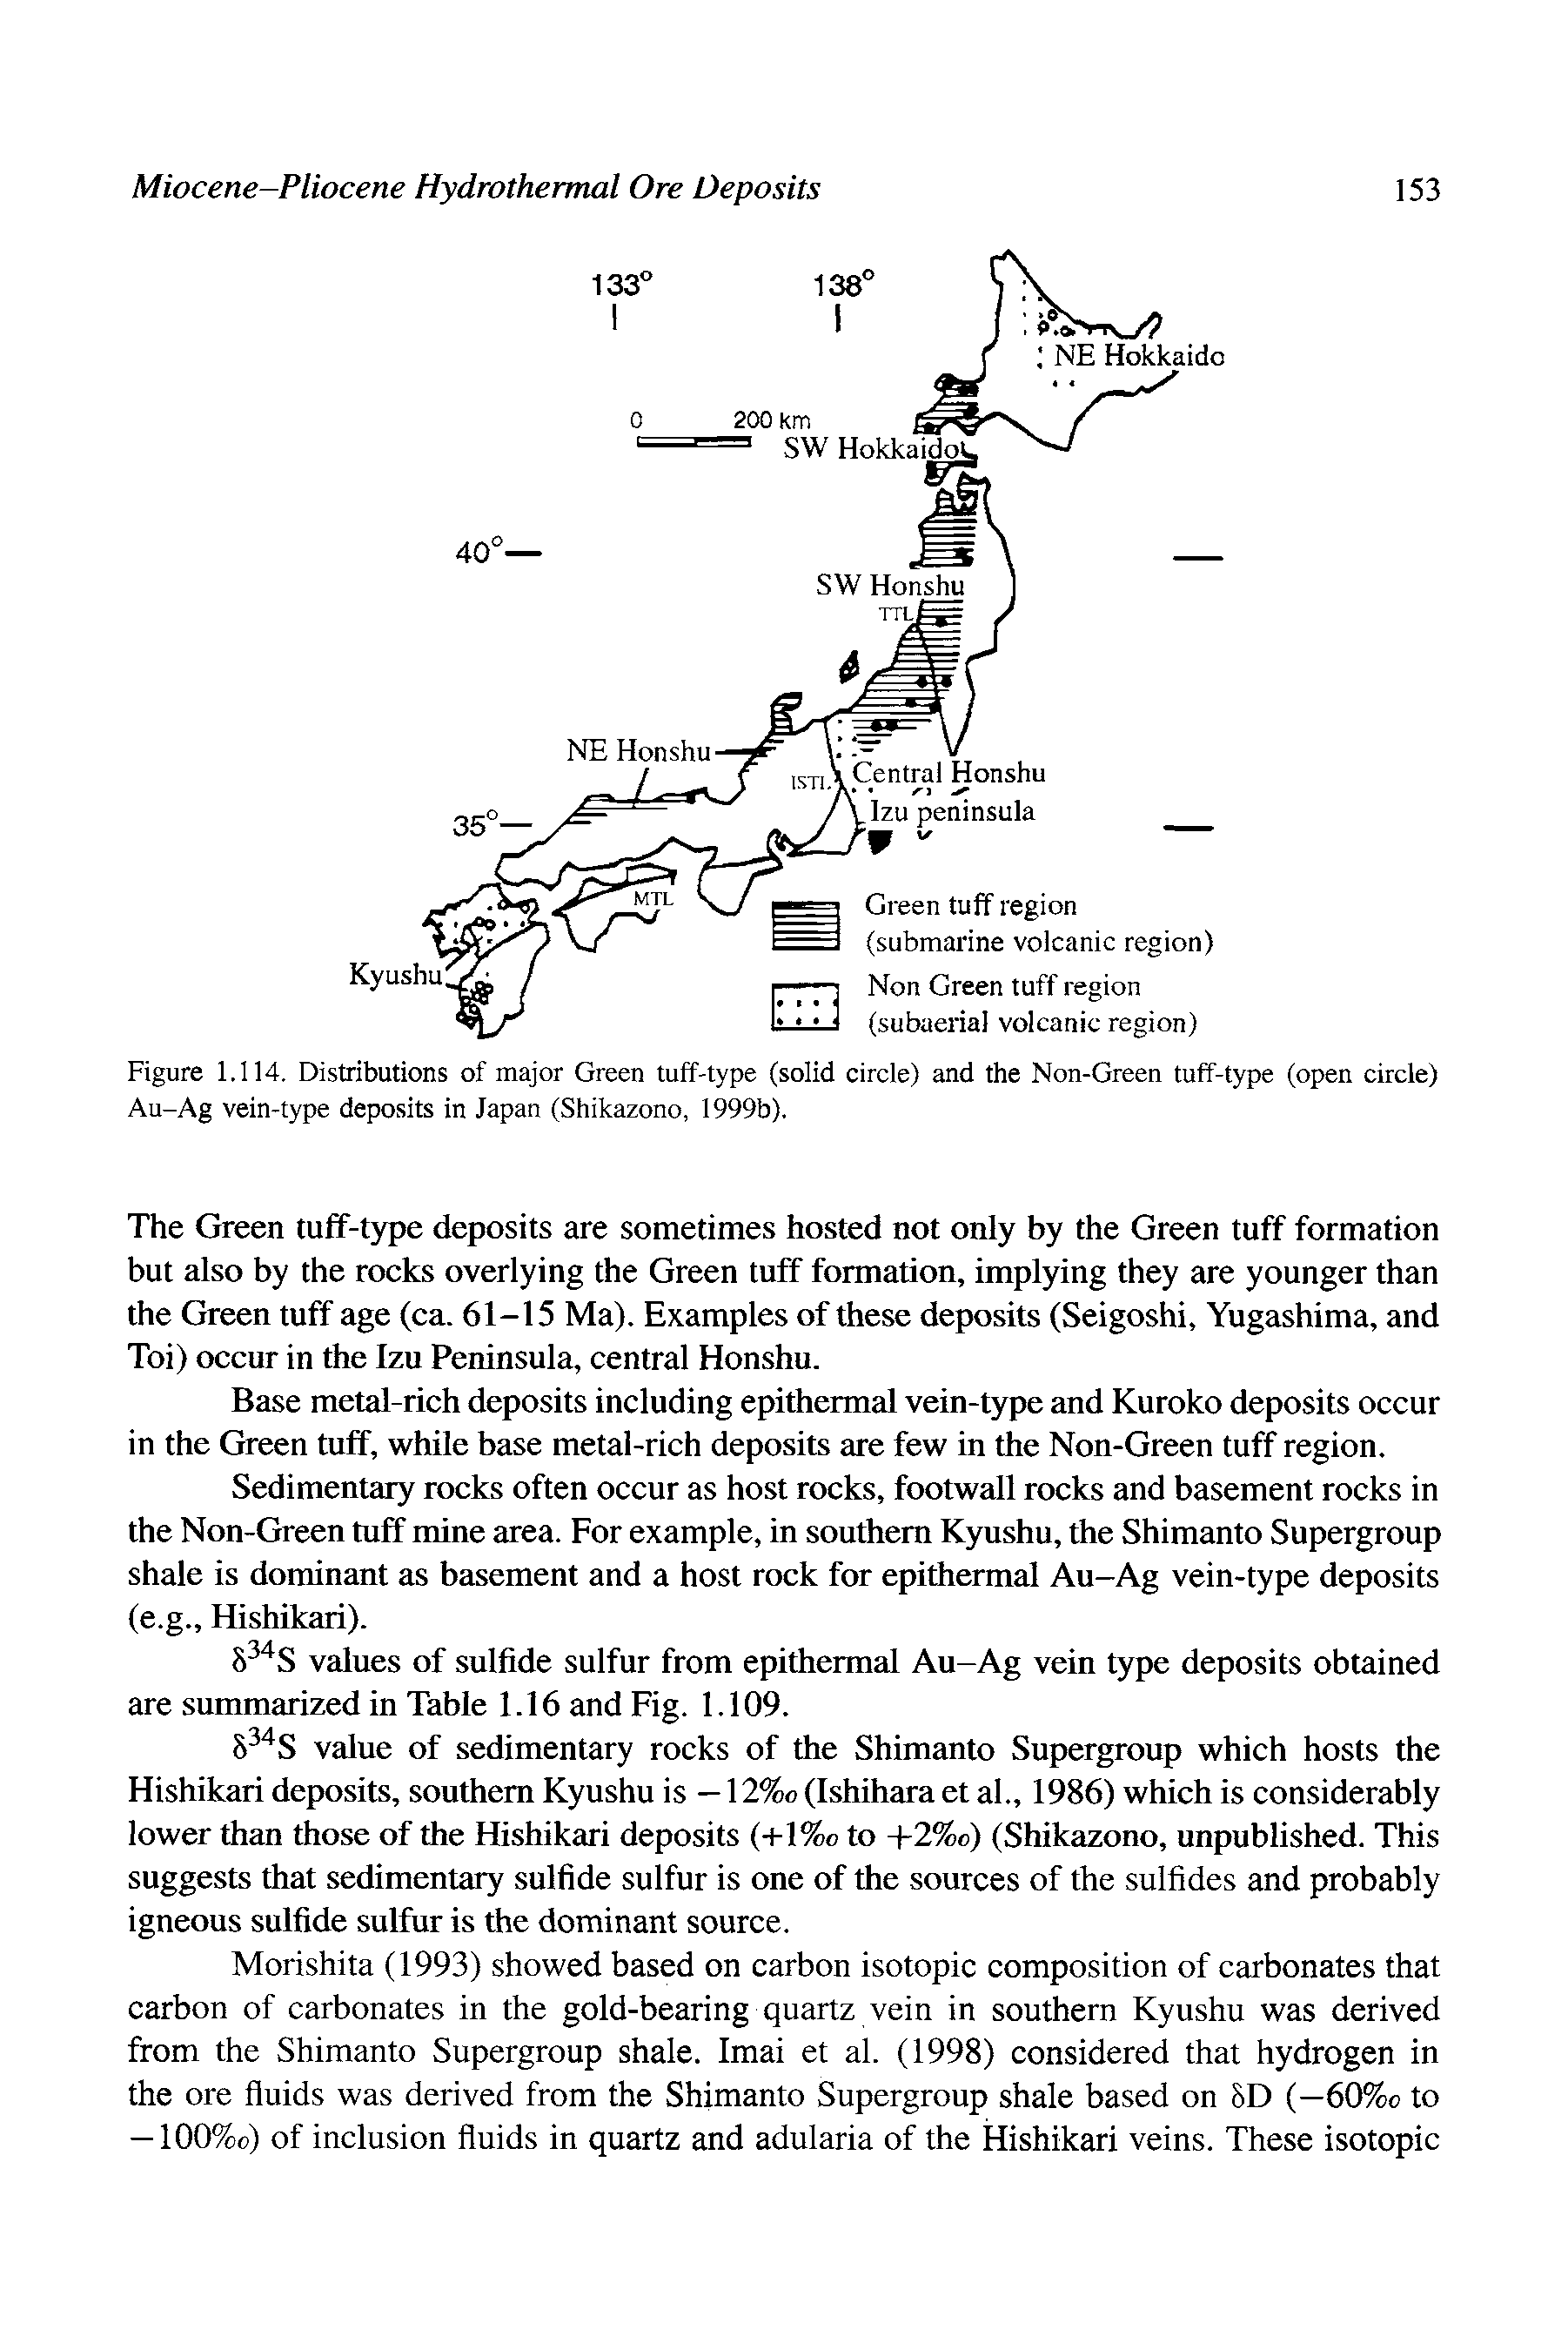 Figure 1.114. Distributions of major Green tuff-type (solid circle) and the Non-Green tuff-type (open circle) Au-Ag vein-type deposits in Japan (Shikazono, 1999b).